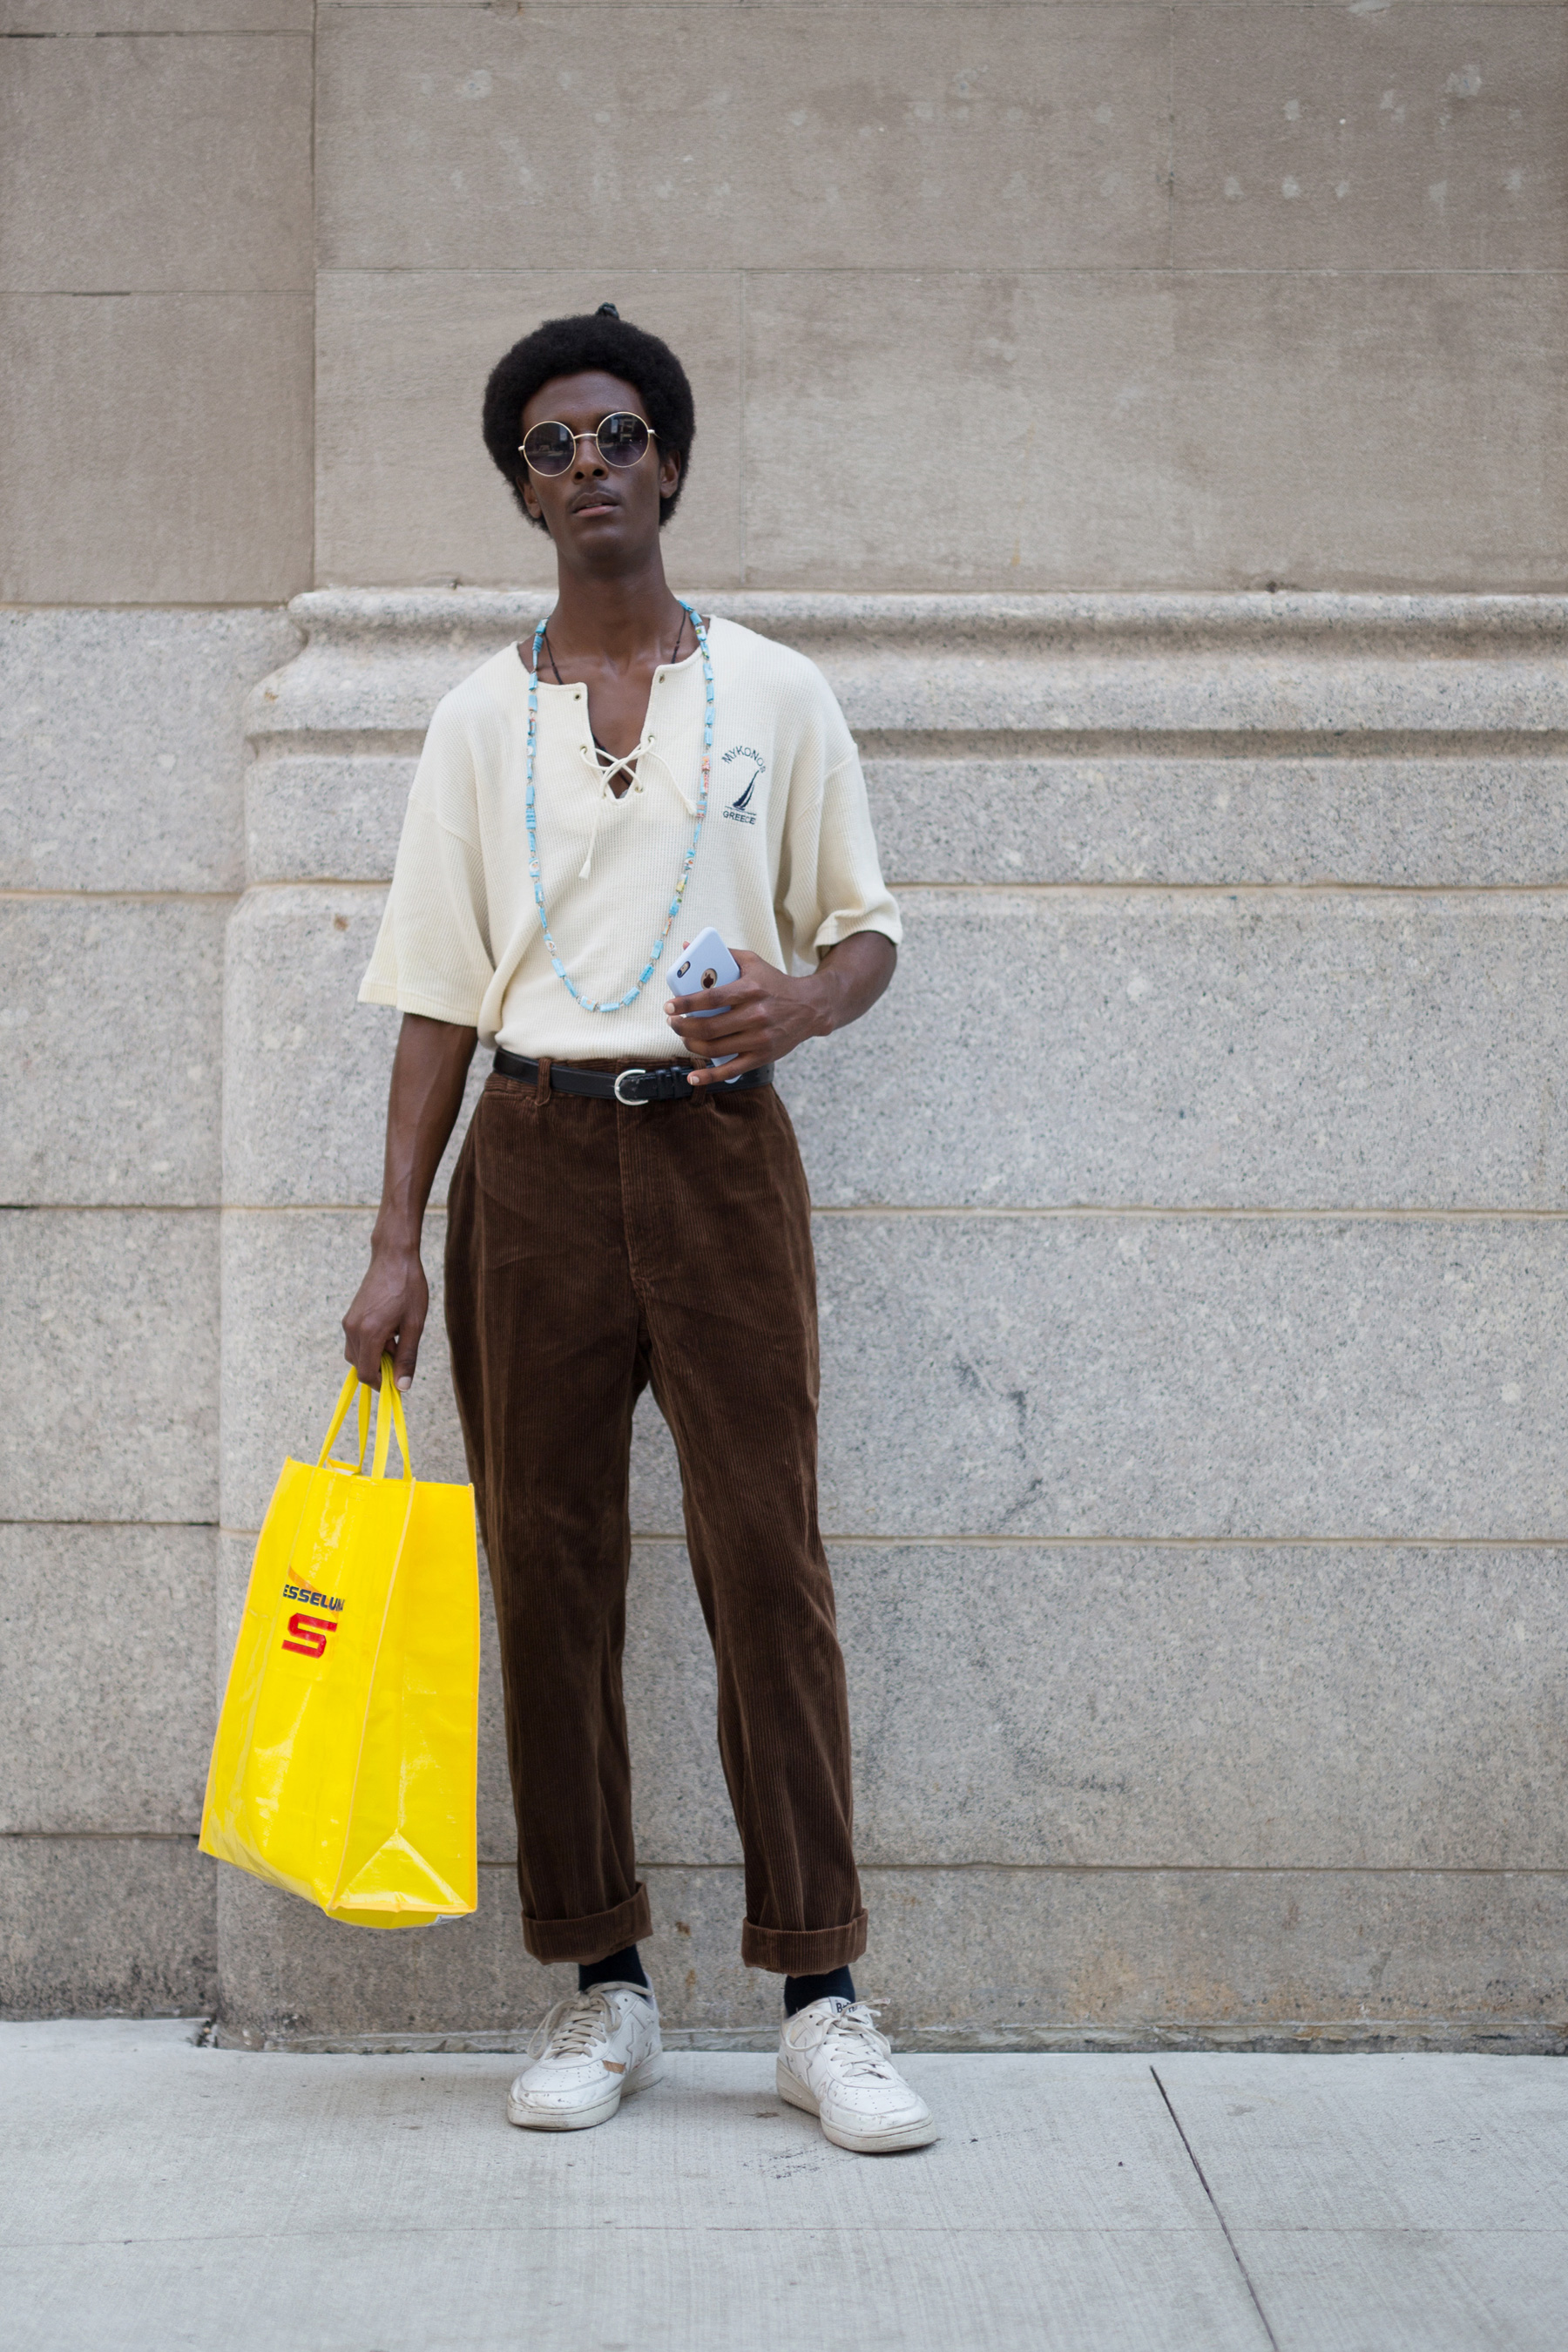 New York Fashion Week Men's Street Style Spring 2018 Day 3 - Cont.